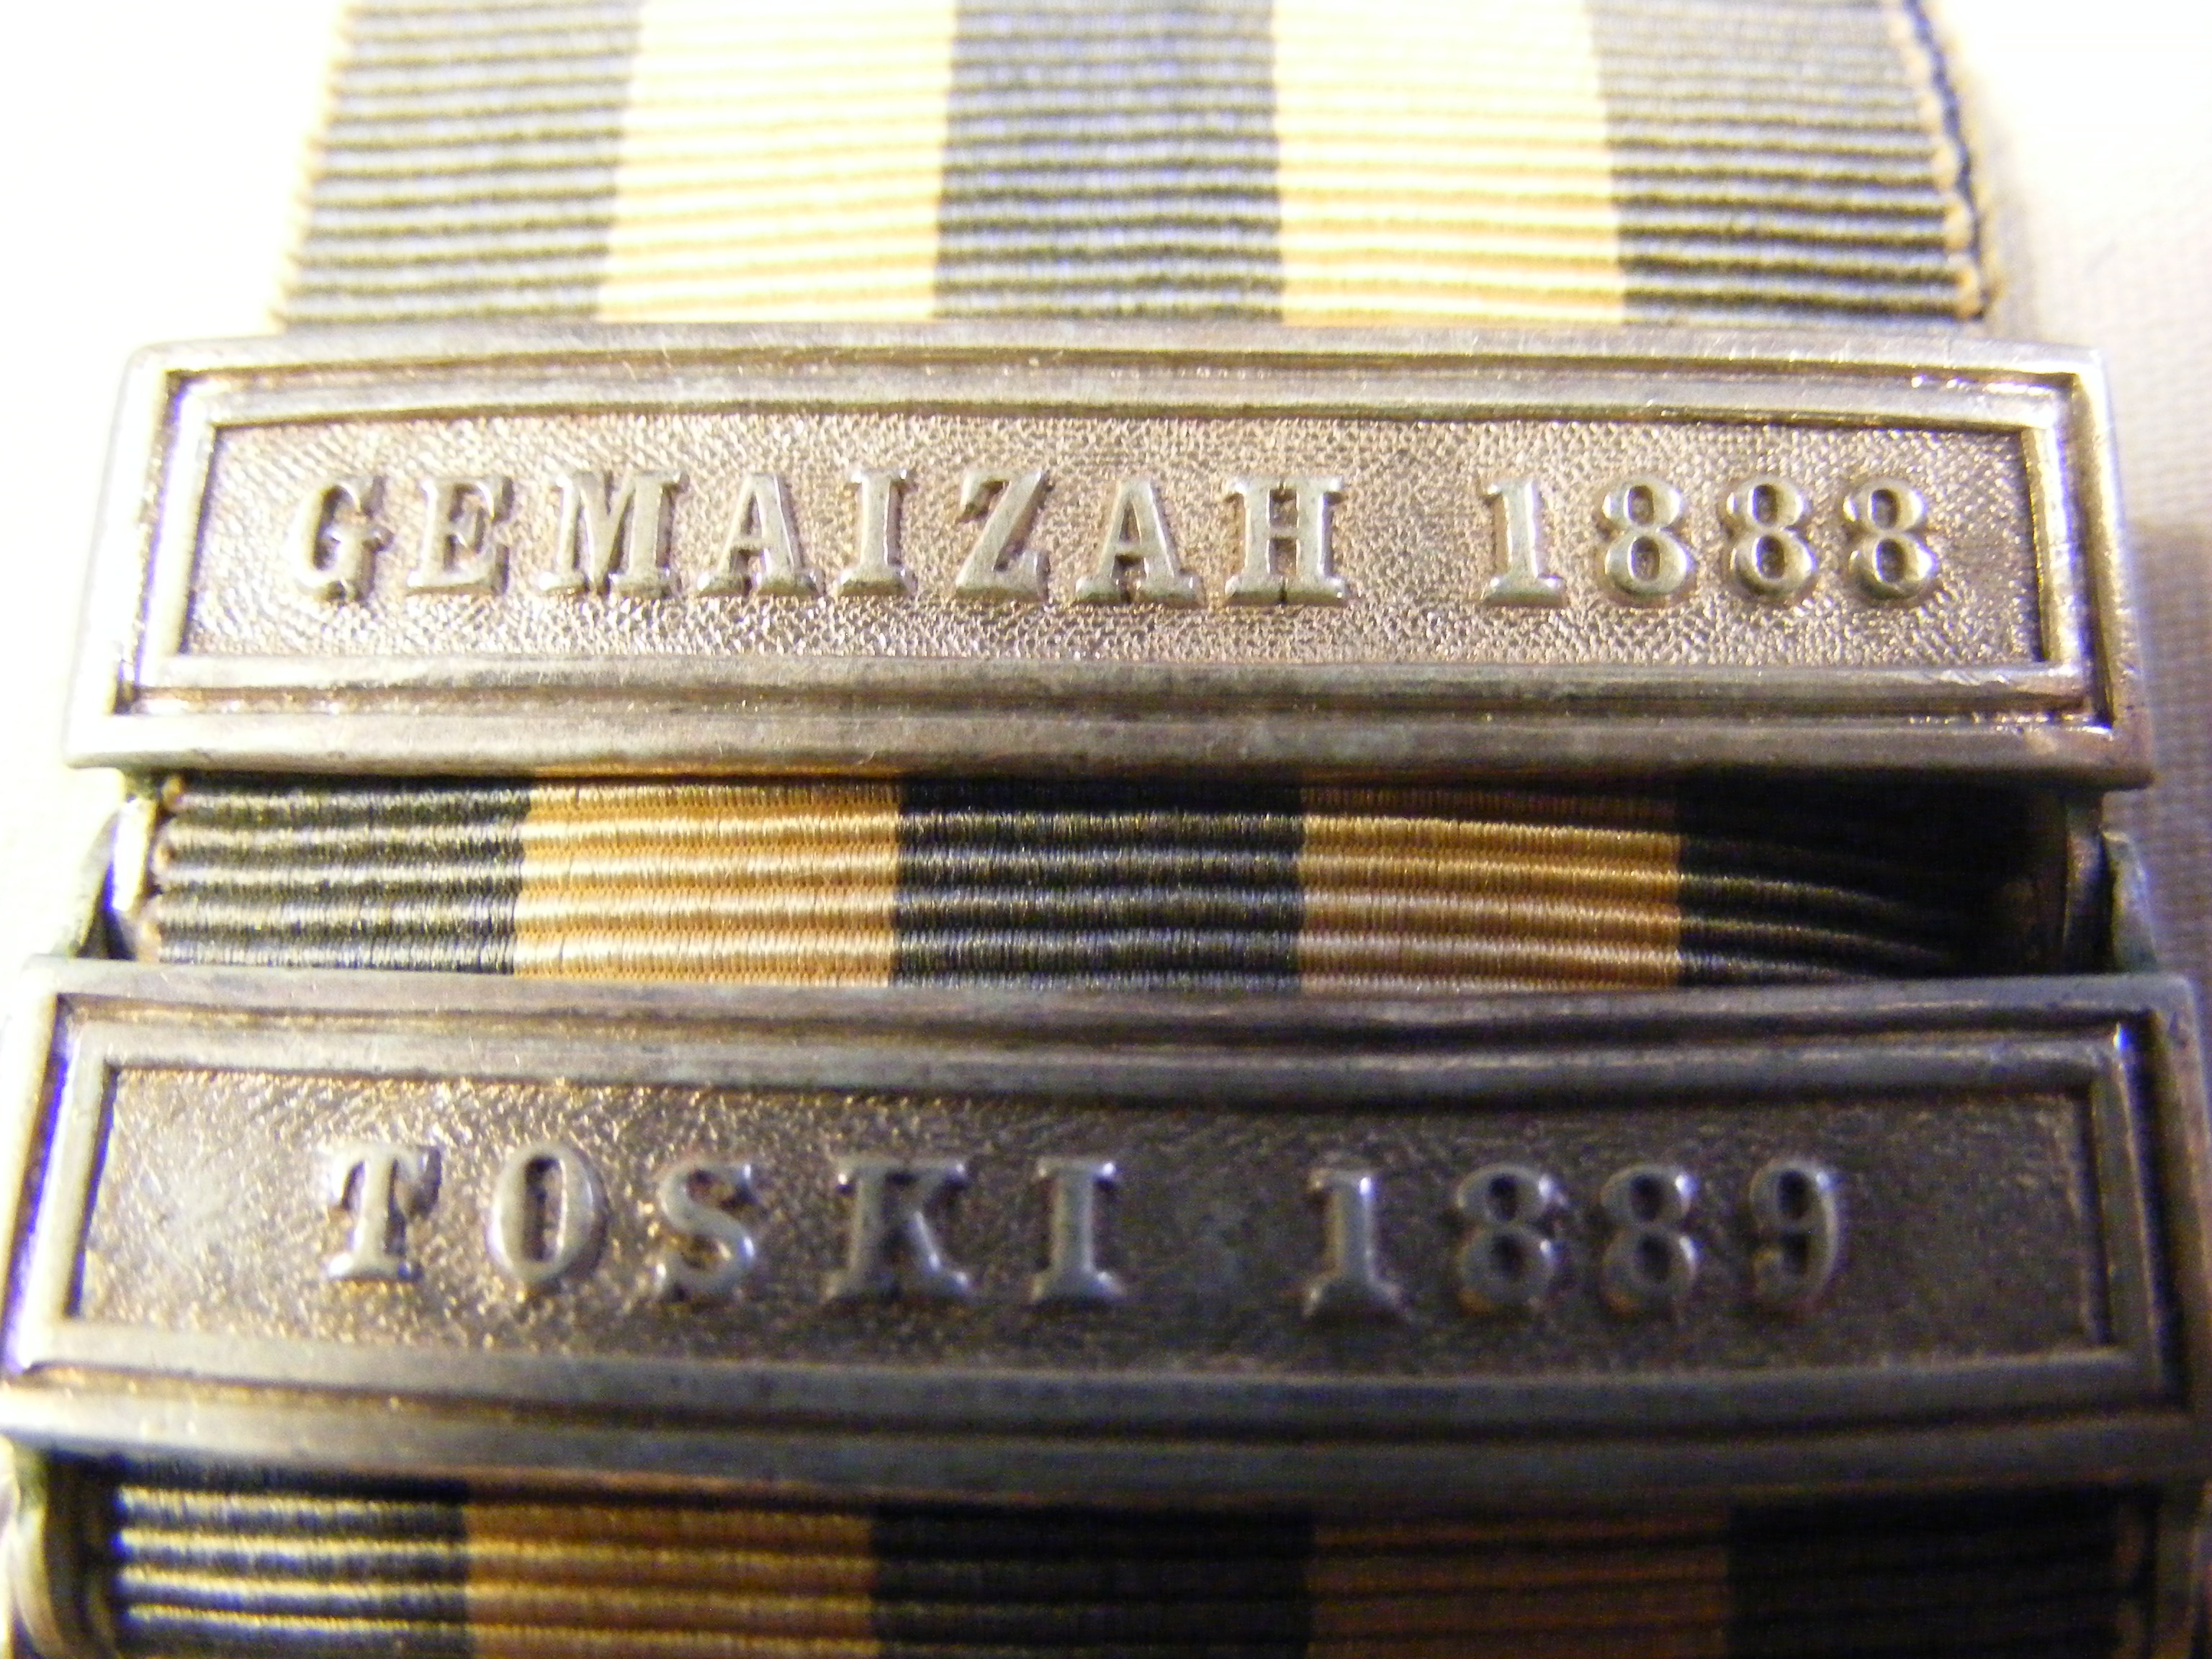 An Egypt War medal with clasp for Gemaizah 1888 an - Image 2 of 3